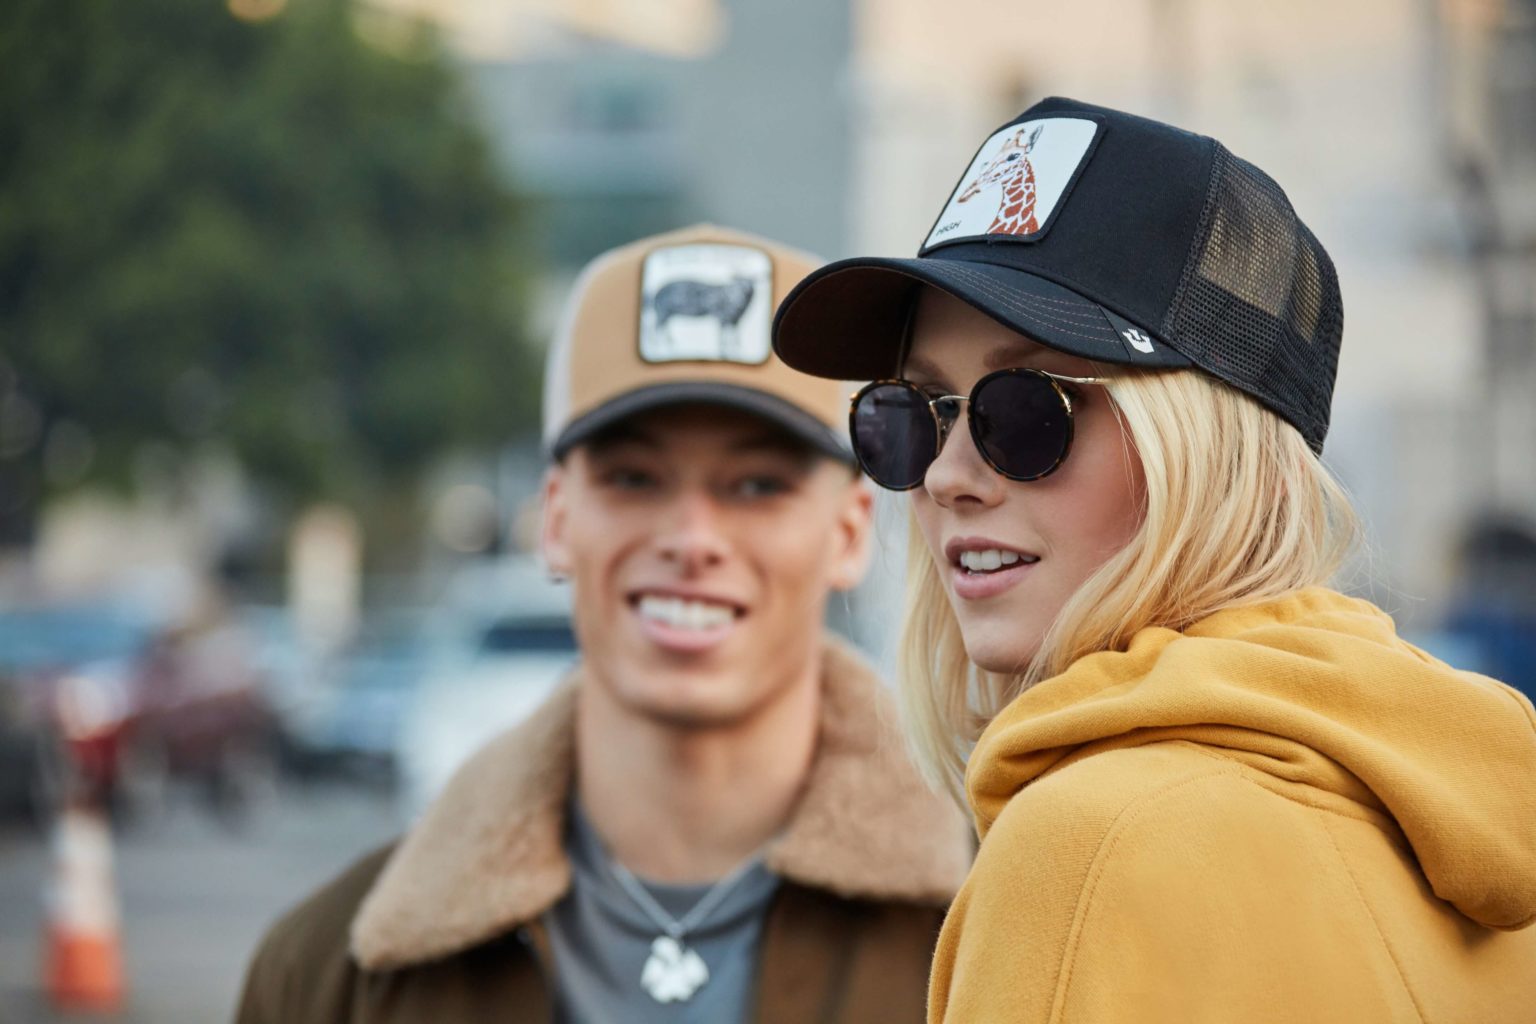 A male and a female models wearing sweaters and caps